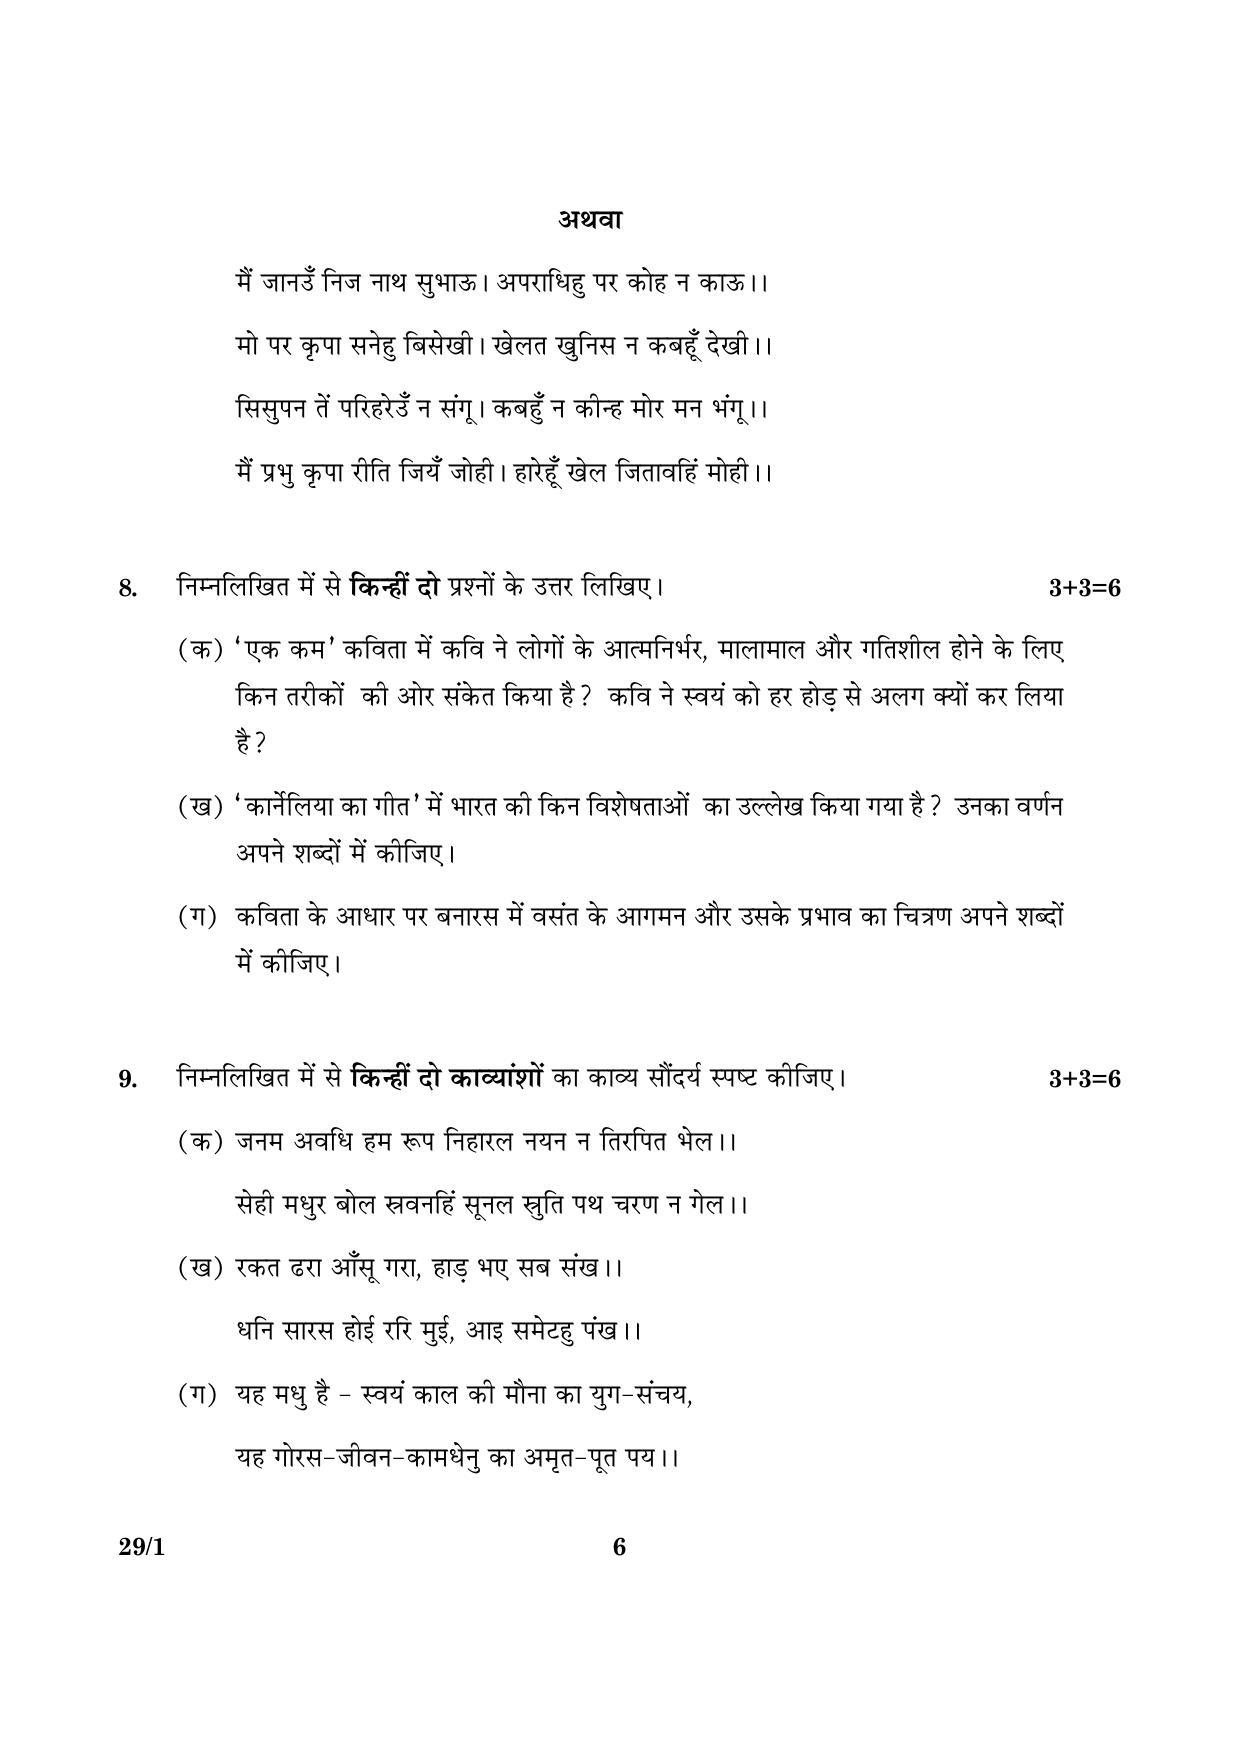 CBSE Class 12 029 Set 1 Hindi Elective 2016 Question Paper - Page 6